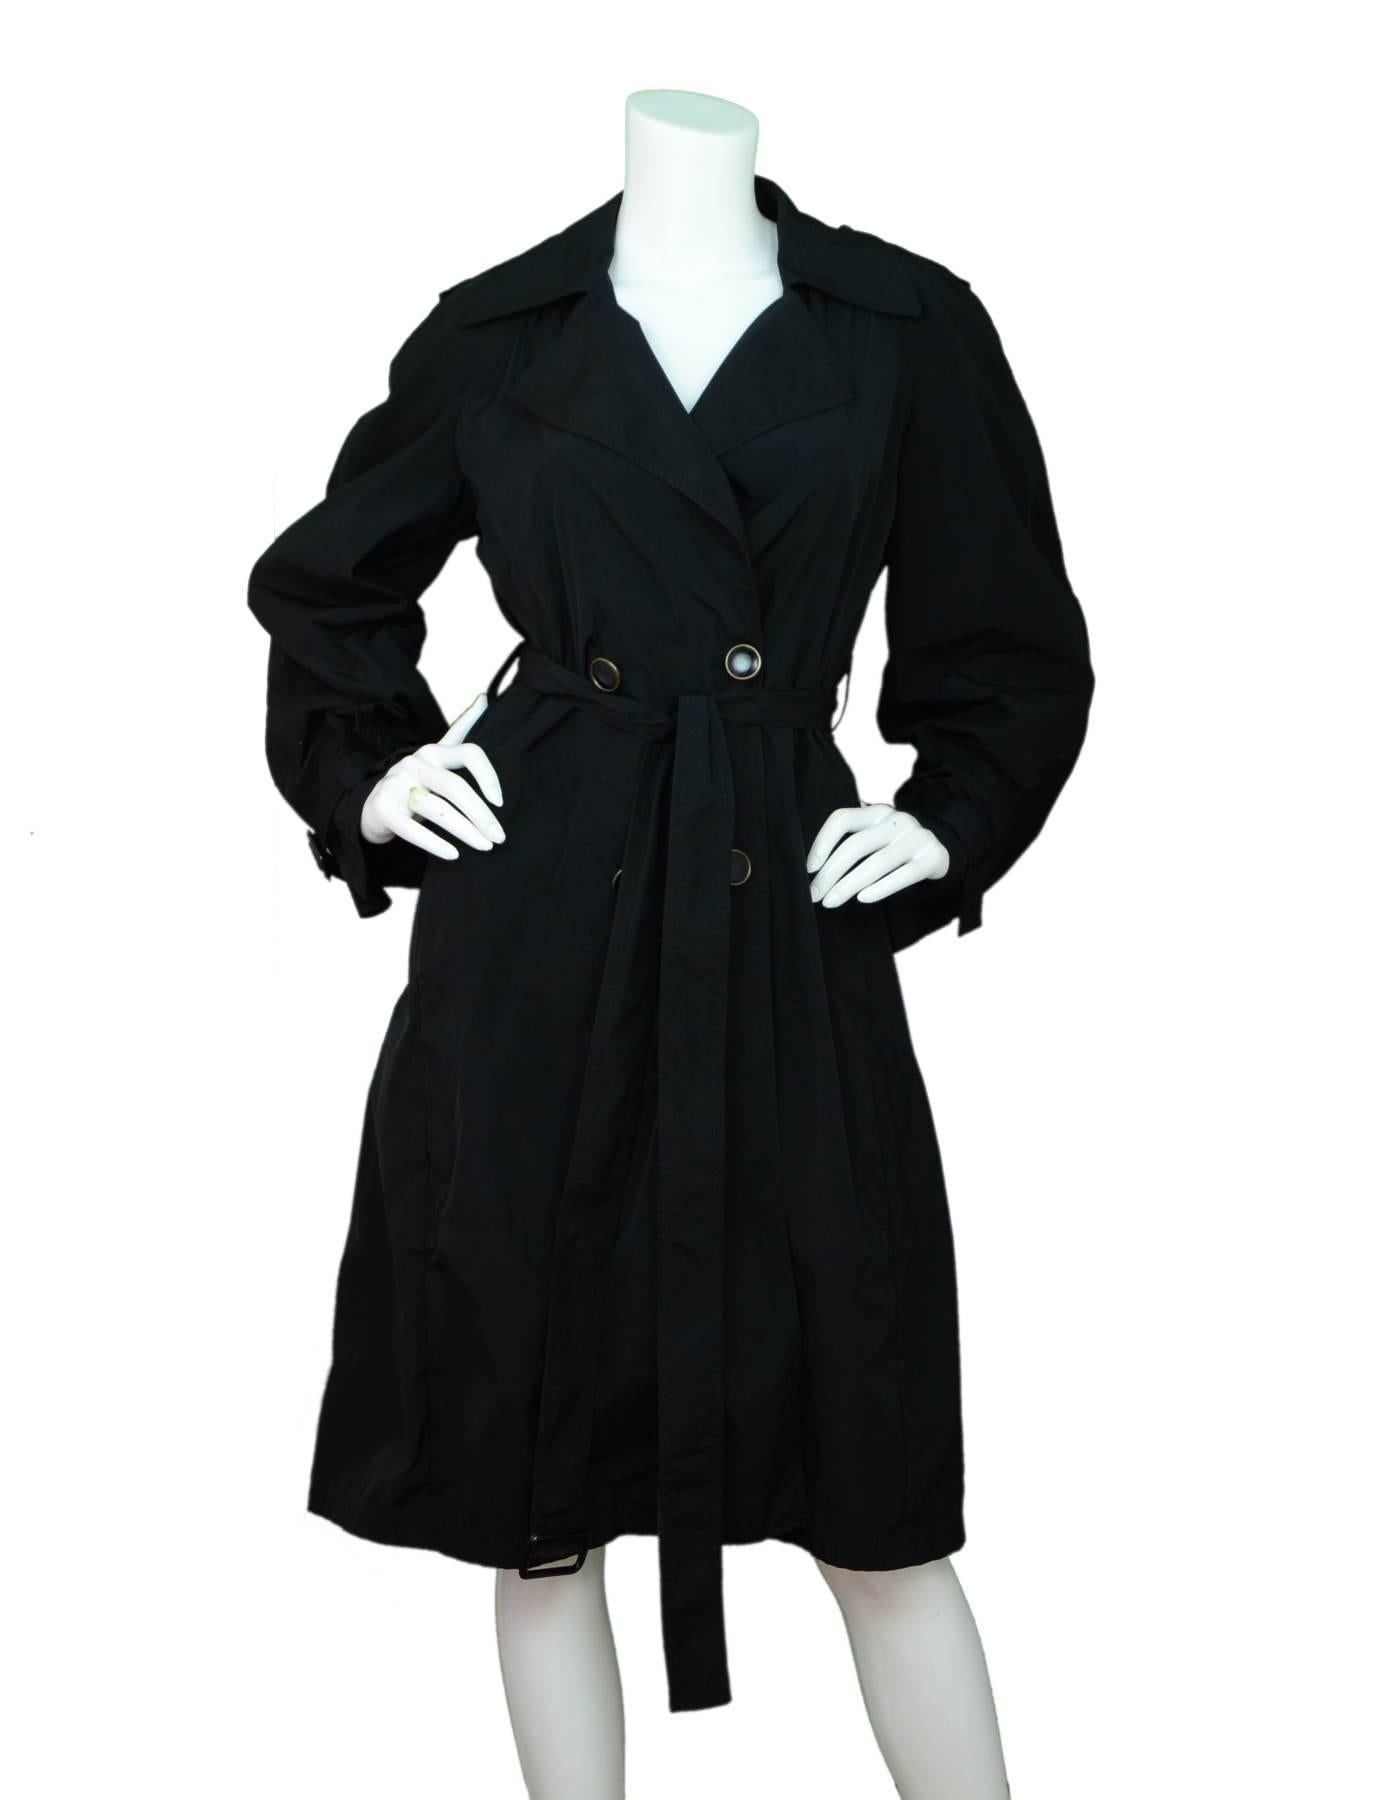 Stella McCartney Black Trench Coat Sz IT40

Features pleated vent at back

Made In: Italy
Color: Black
Composition: 100% polyester
Lining: None
Closure/Opening: Double breasted button closure
Exterior Pockets: Two slit pockets
Overall Condition: